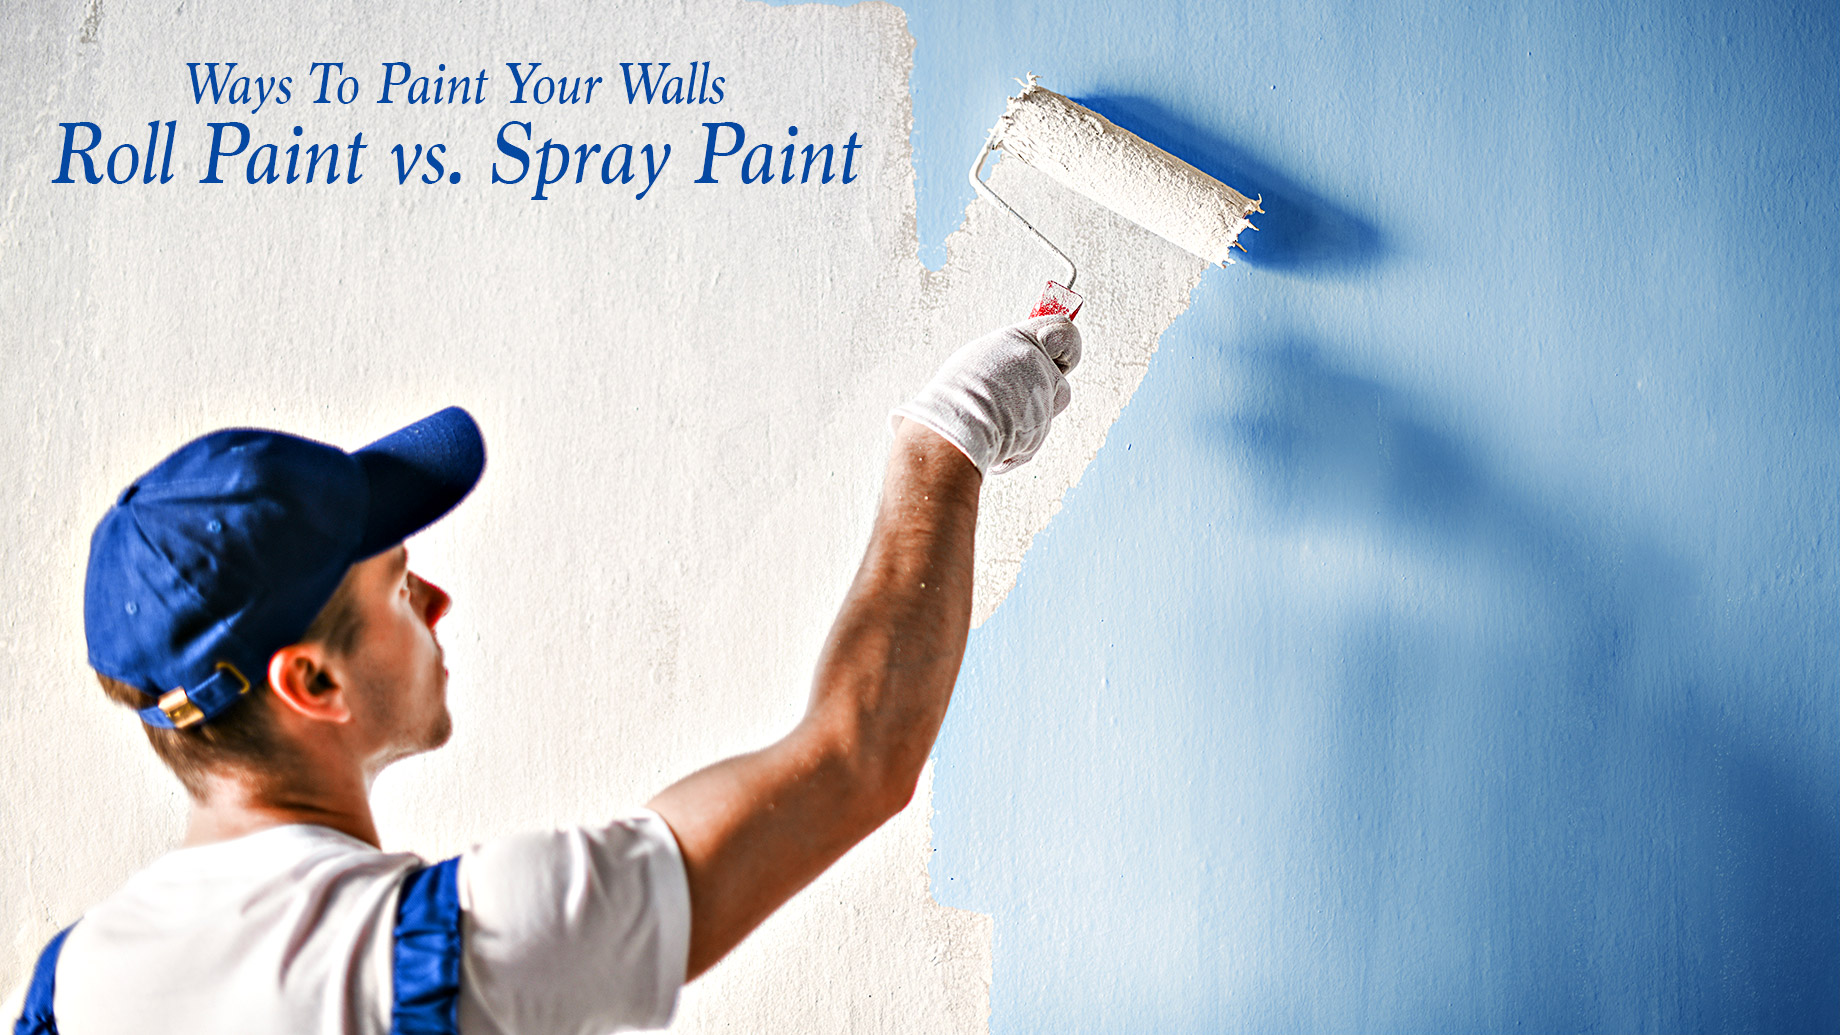 Ways To Paint Your Walls - Roll Paint vs. Spray Paint